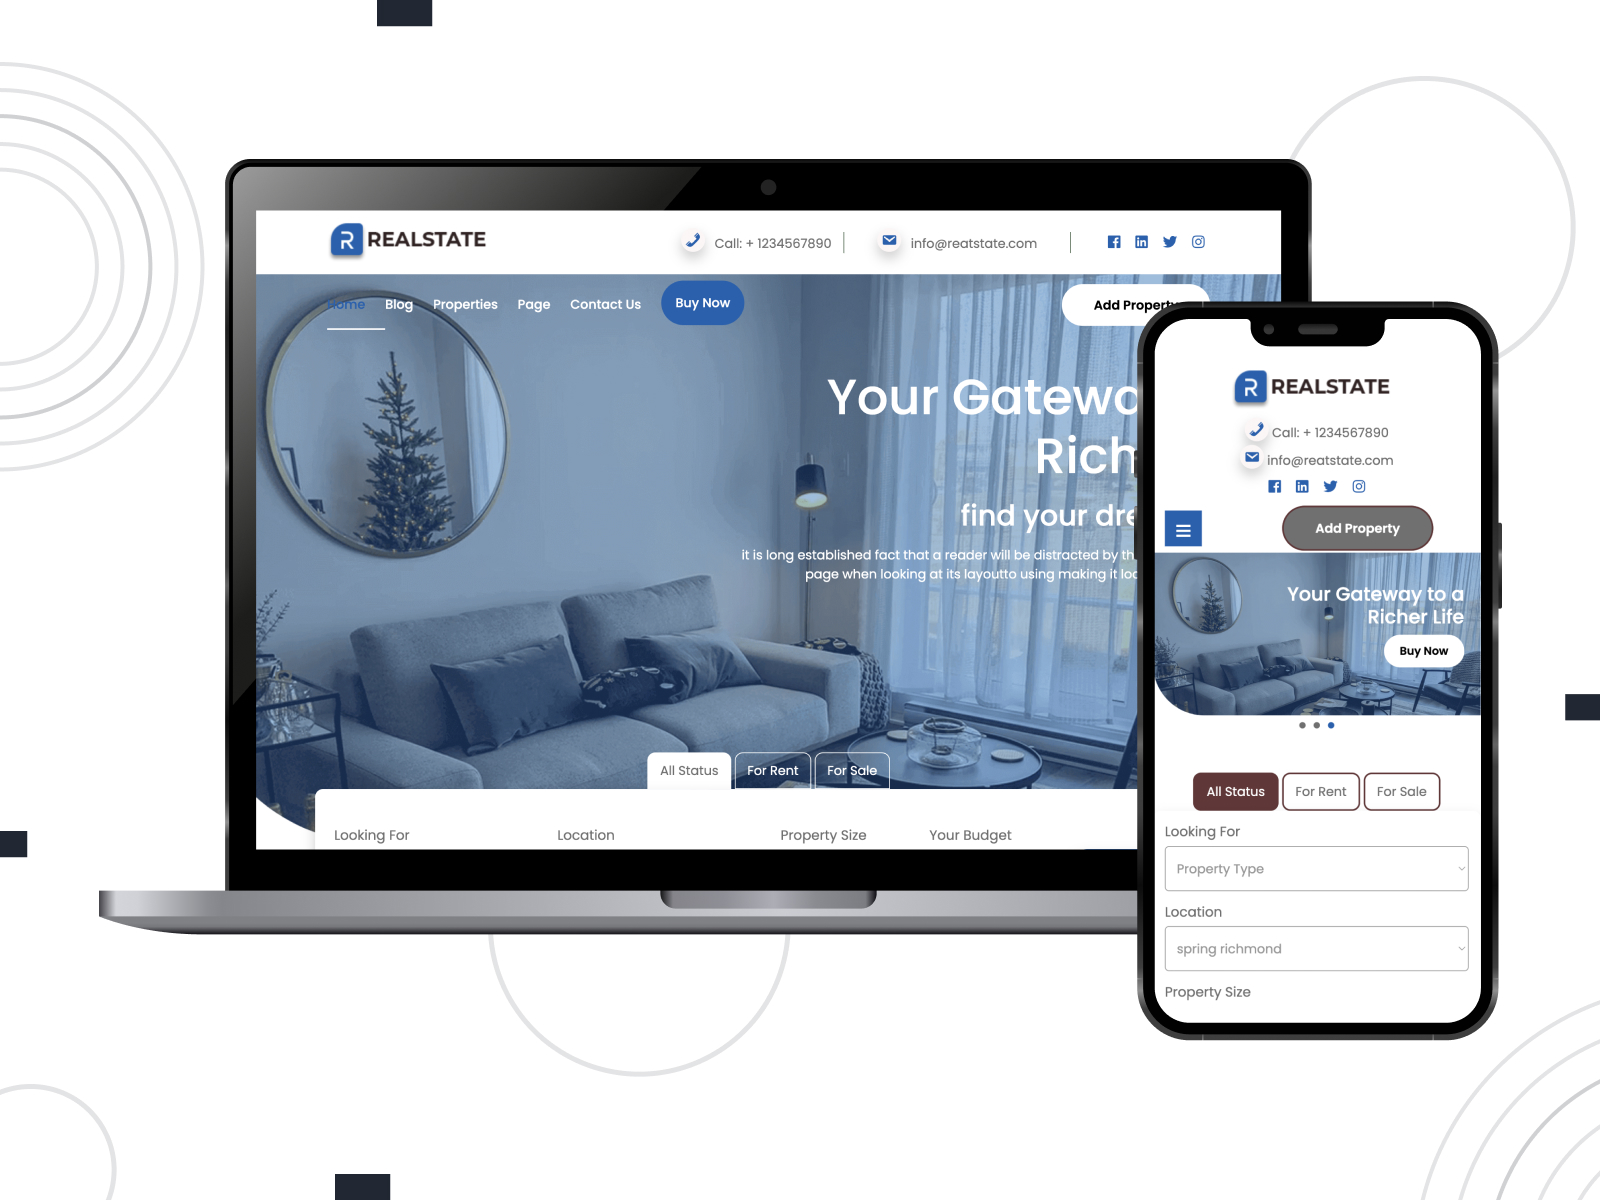 Representation of Realestate Agent, a well-designed & adaptable WordPress theme for realtors with a high-quality property section in royalblue, white, and black chromatic palette.